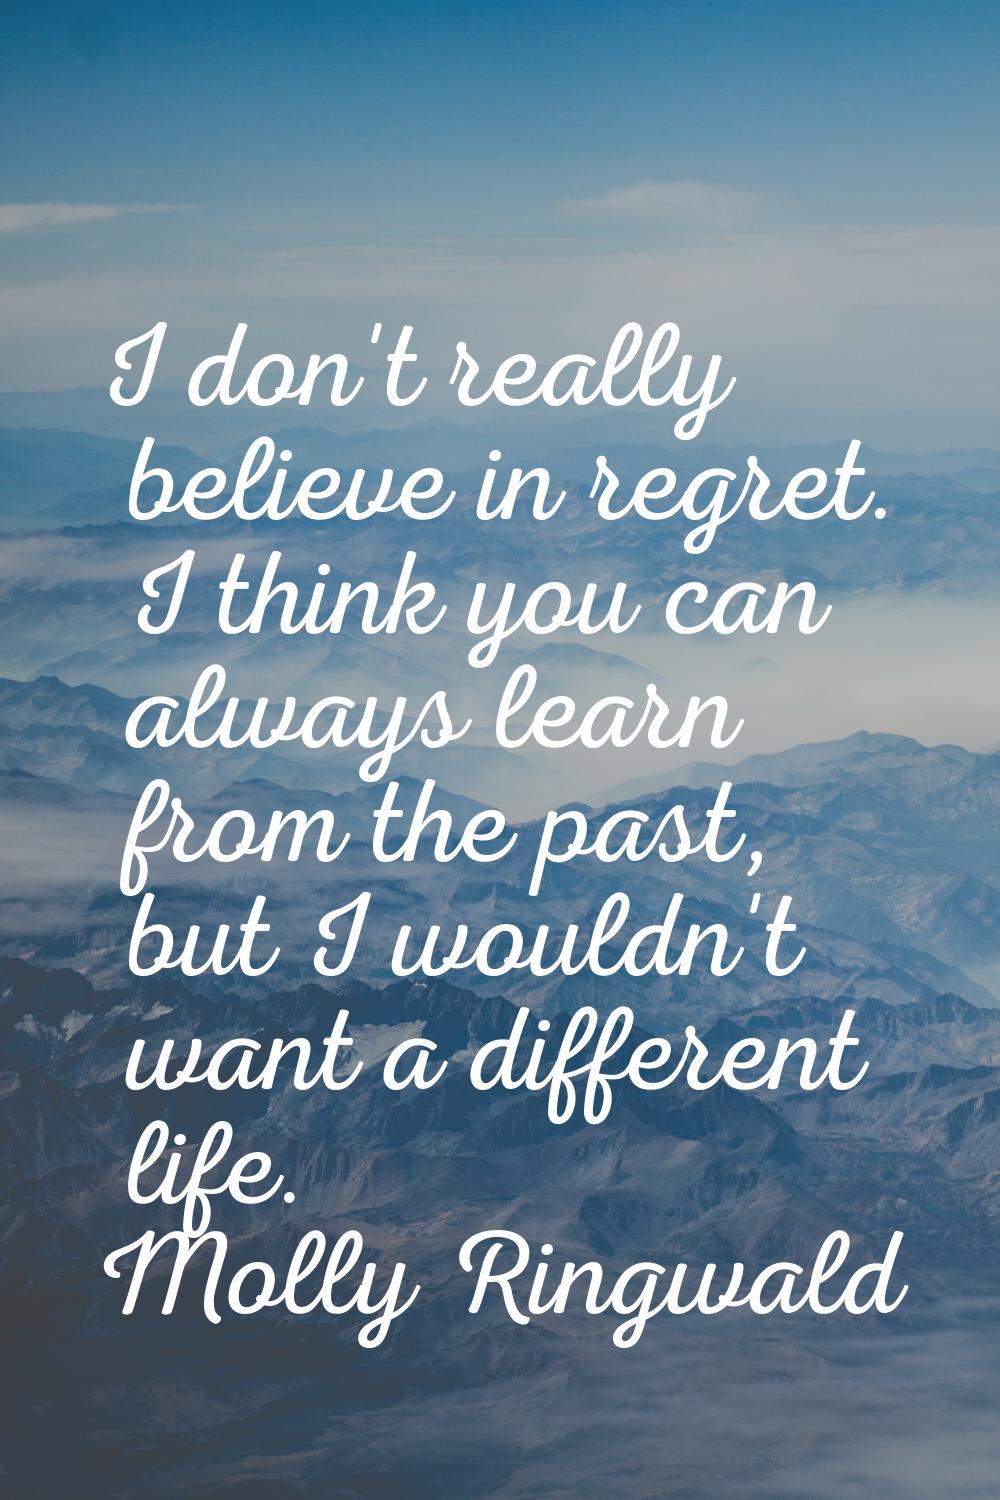 I don't really believe in regret. I think you can always learn from the past, but I wouldn't want a